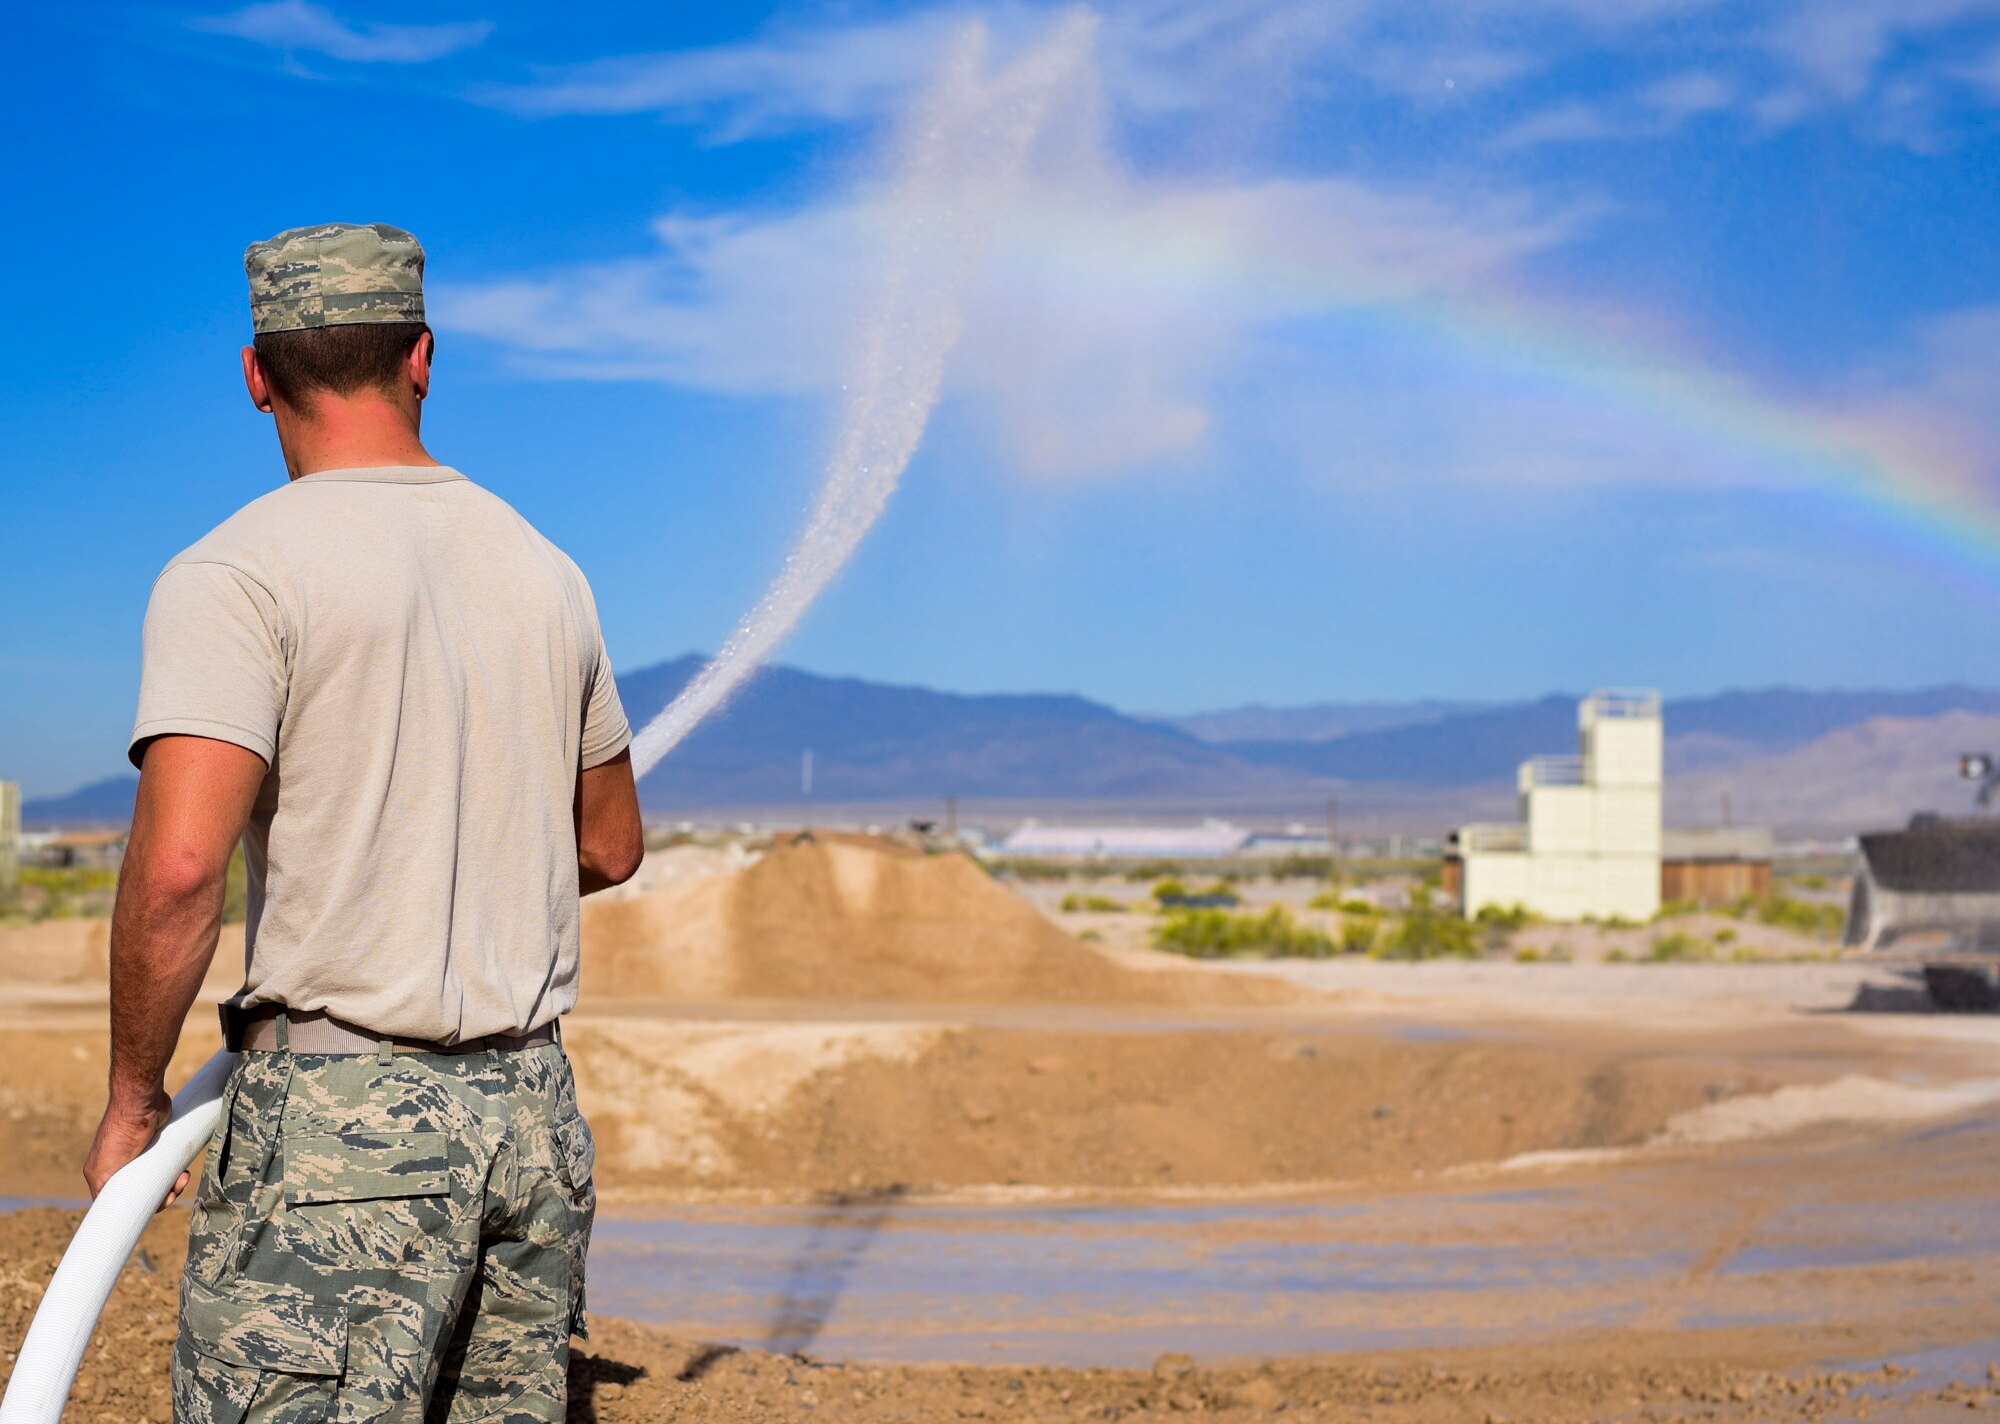 A pavement and construction equipment Airman from the 99th Civil Engineer Squadron sprays water to keep dust from kicking up during a base emergency engineer force training exercise at Nellis Air Force Base, Nevada, Oct. 19, 2017. The exercise was comprised of bare base setup and airfield repair to emphasize pre-deployment training. (U.S. Air Force photo by Airman 1st Class Andrew D. Sarver/Released)